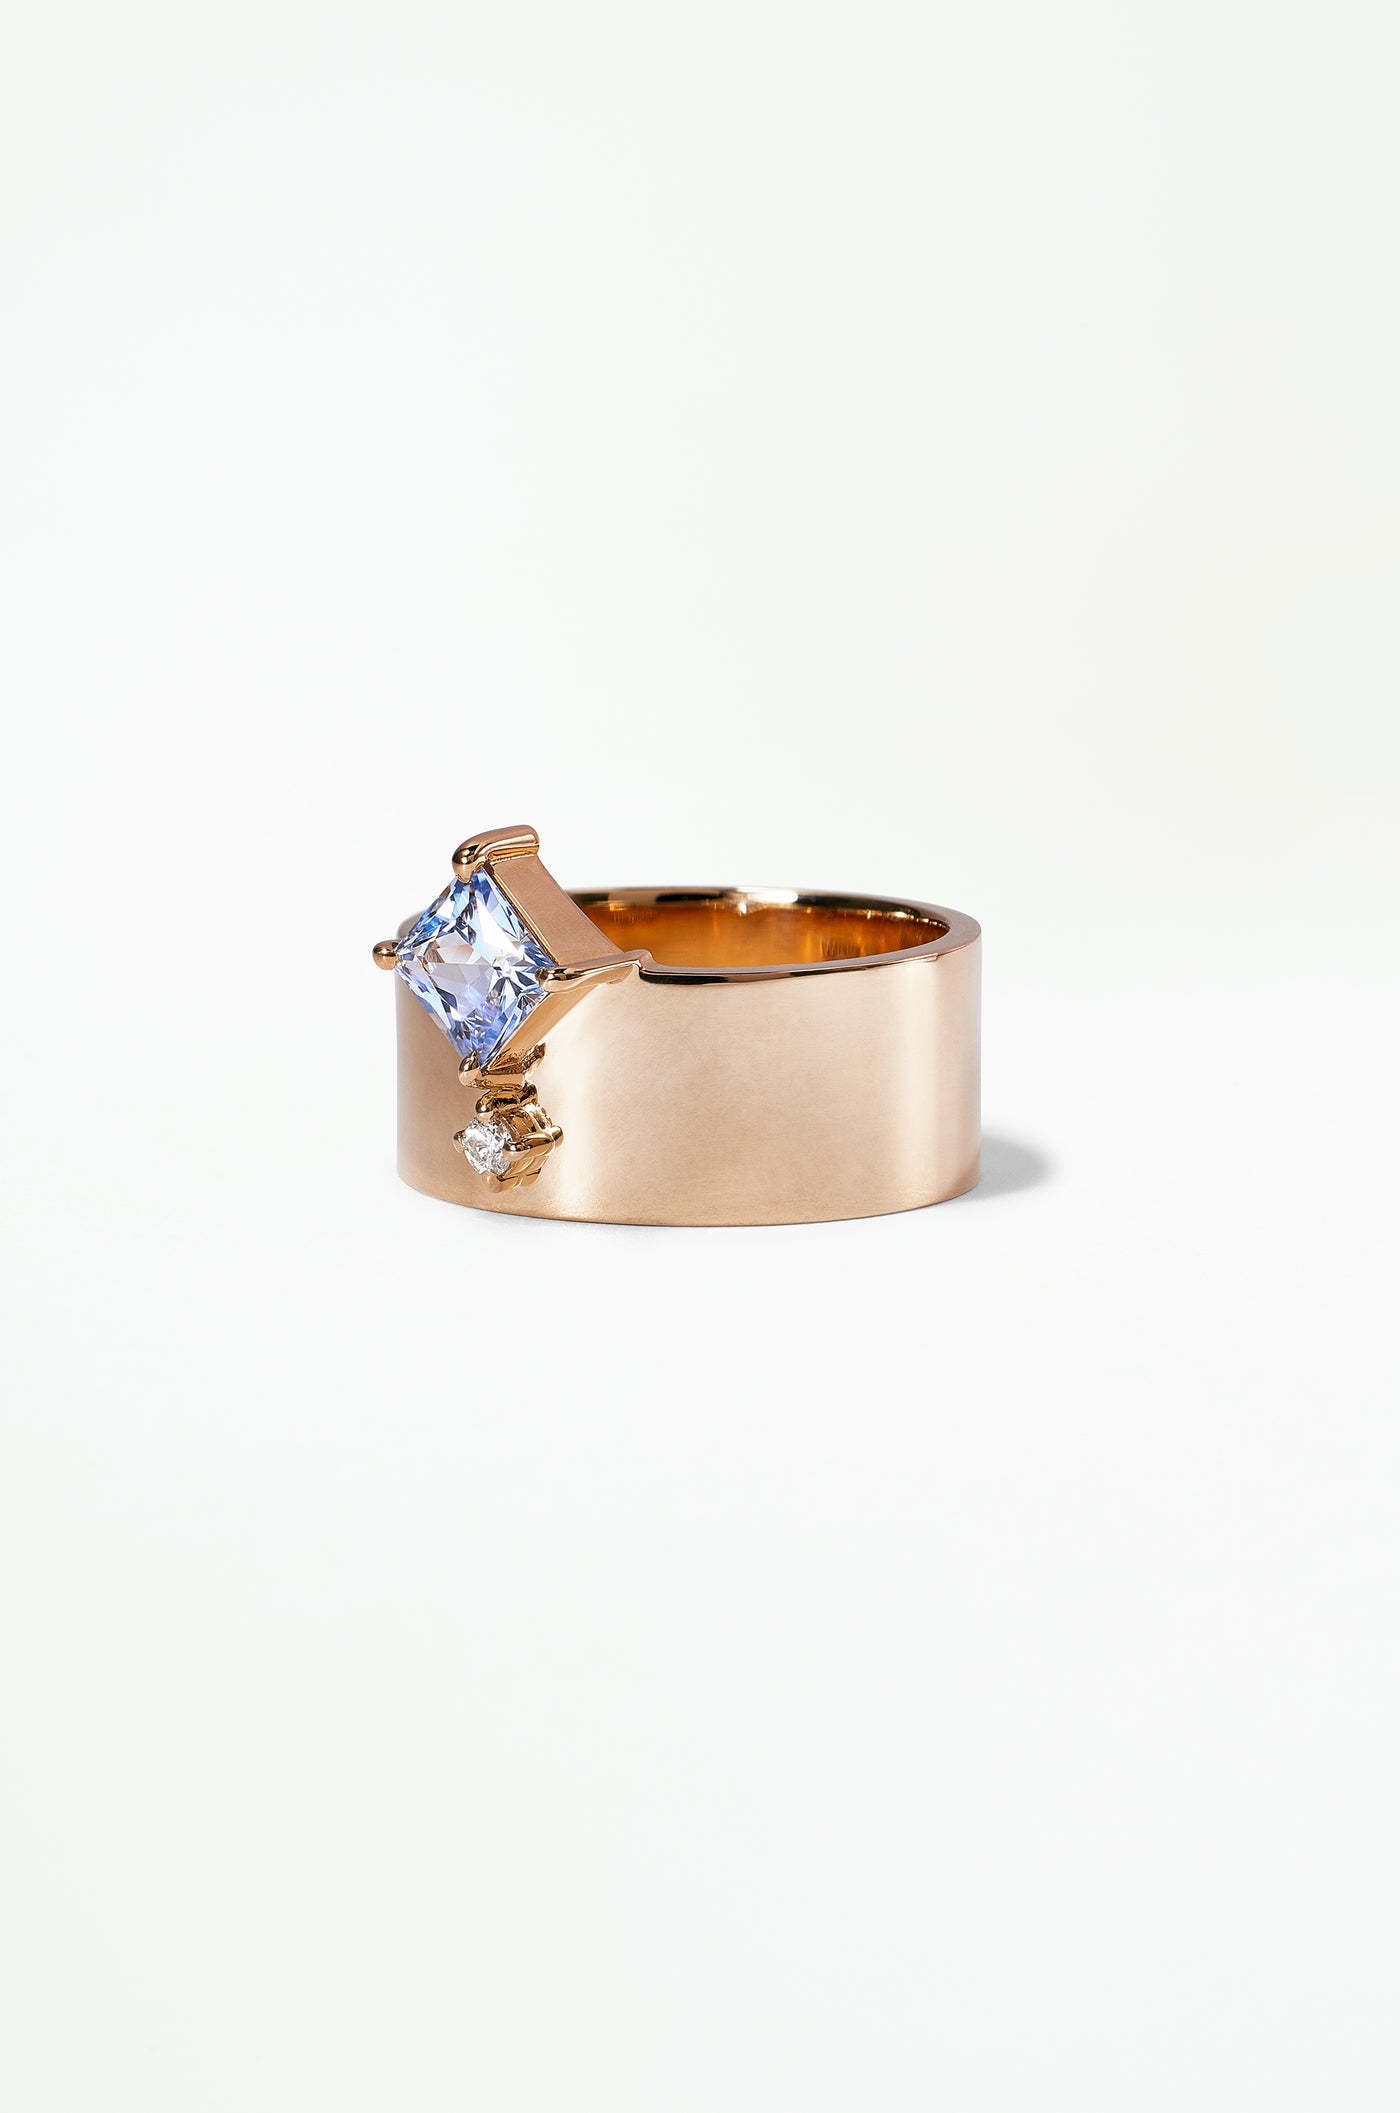 One of a Kind Princess Cut Sapphire and Diamond Bricolage Ring No. 21